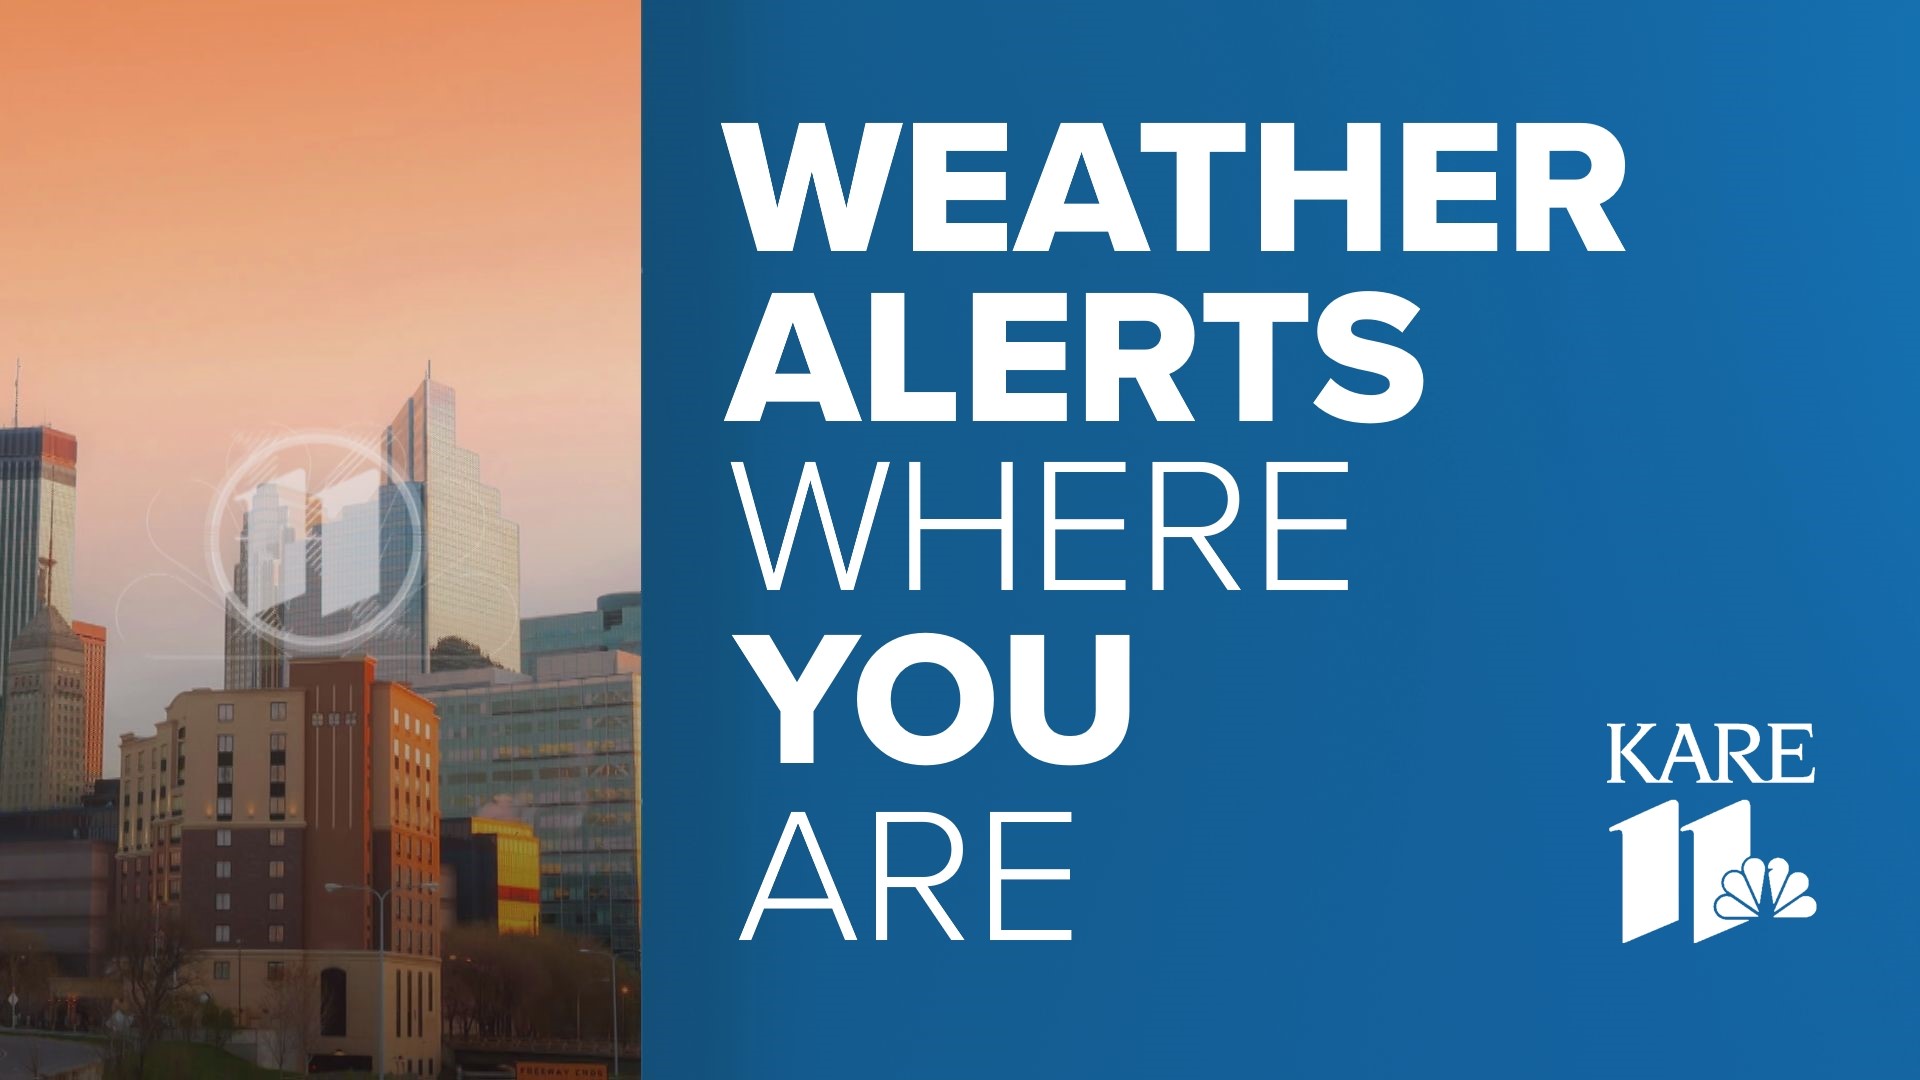 Here are the simple steps to get weather alerts for your location on the KARE 11 app.